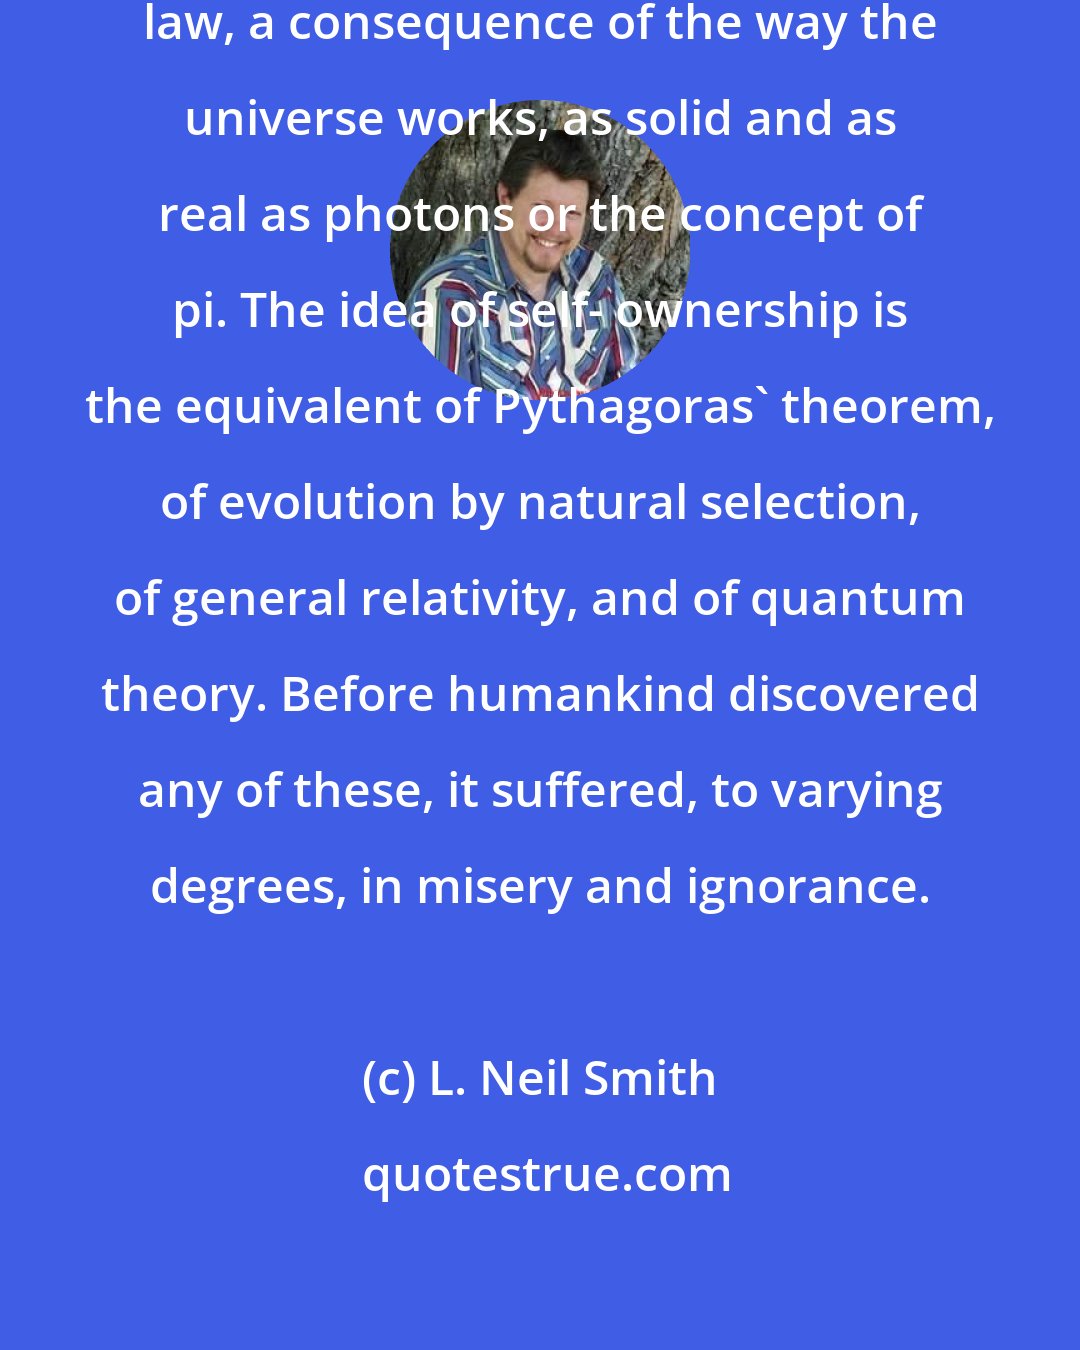 L. Neil Smith: Human rights are an aspect of natural law, a consequence of the way the universe works, as solid and as real as photons or the concept of pi. The idea of self- ownership is the equivalent of Pythagoras' theorem, of evolution by natural selection, of general relativity, and of quantum theory. Before humankind discovered any of these, it suffered, to varying degrees, in misery and ignorance.